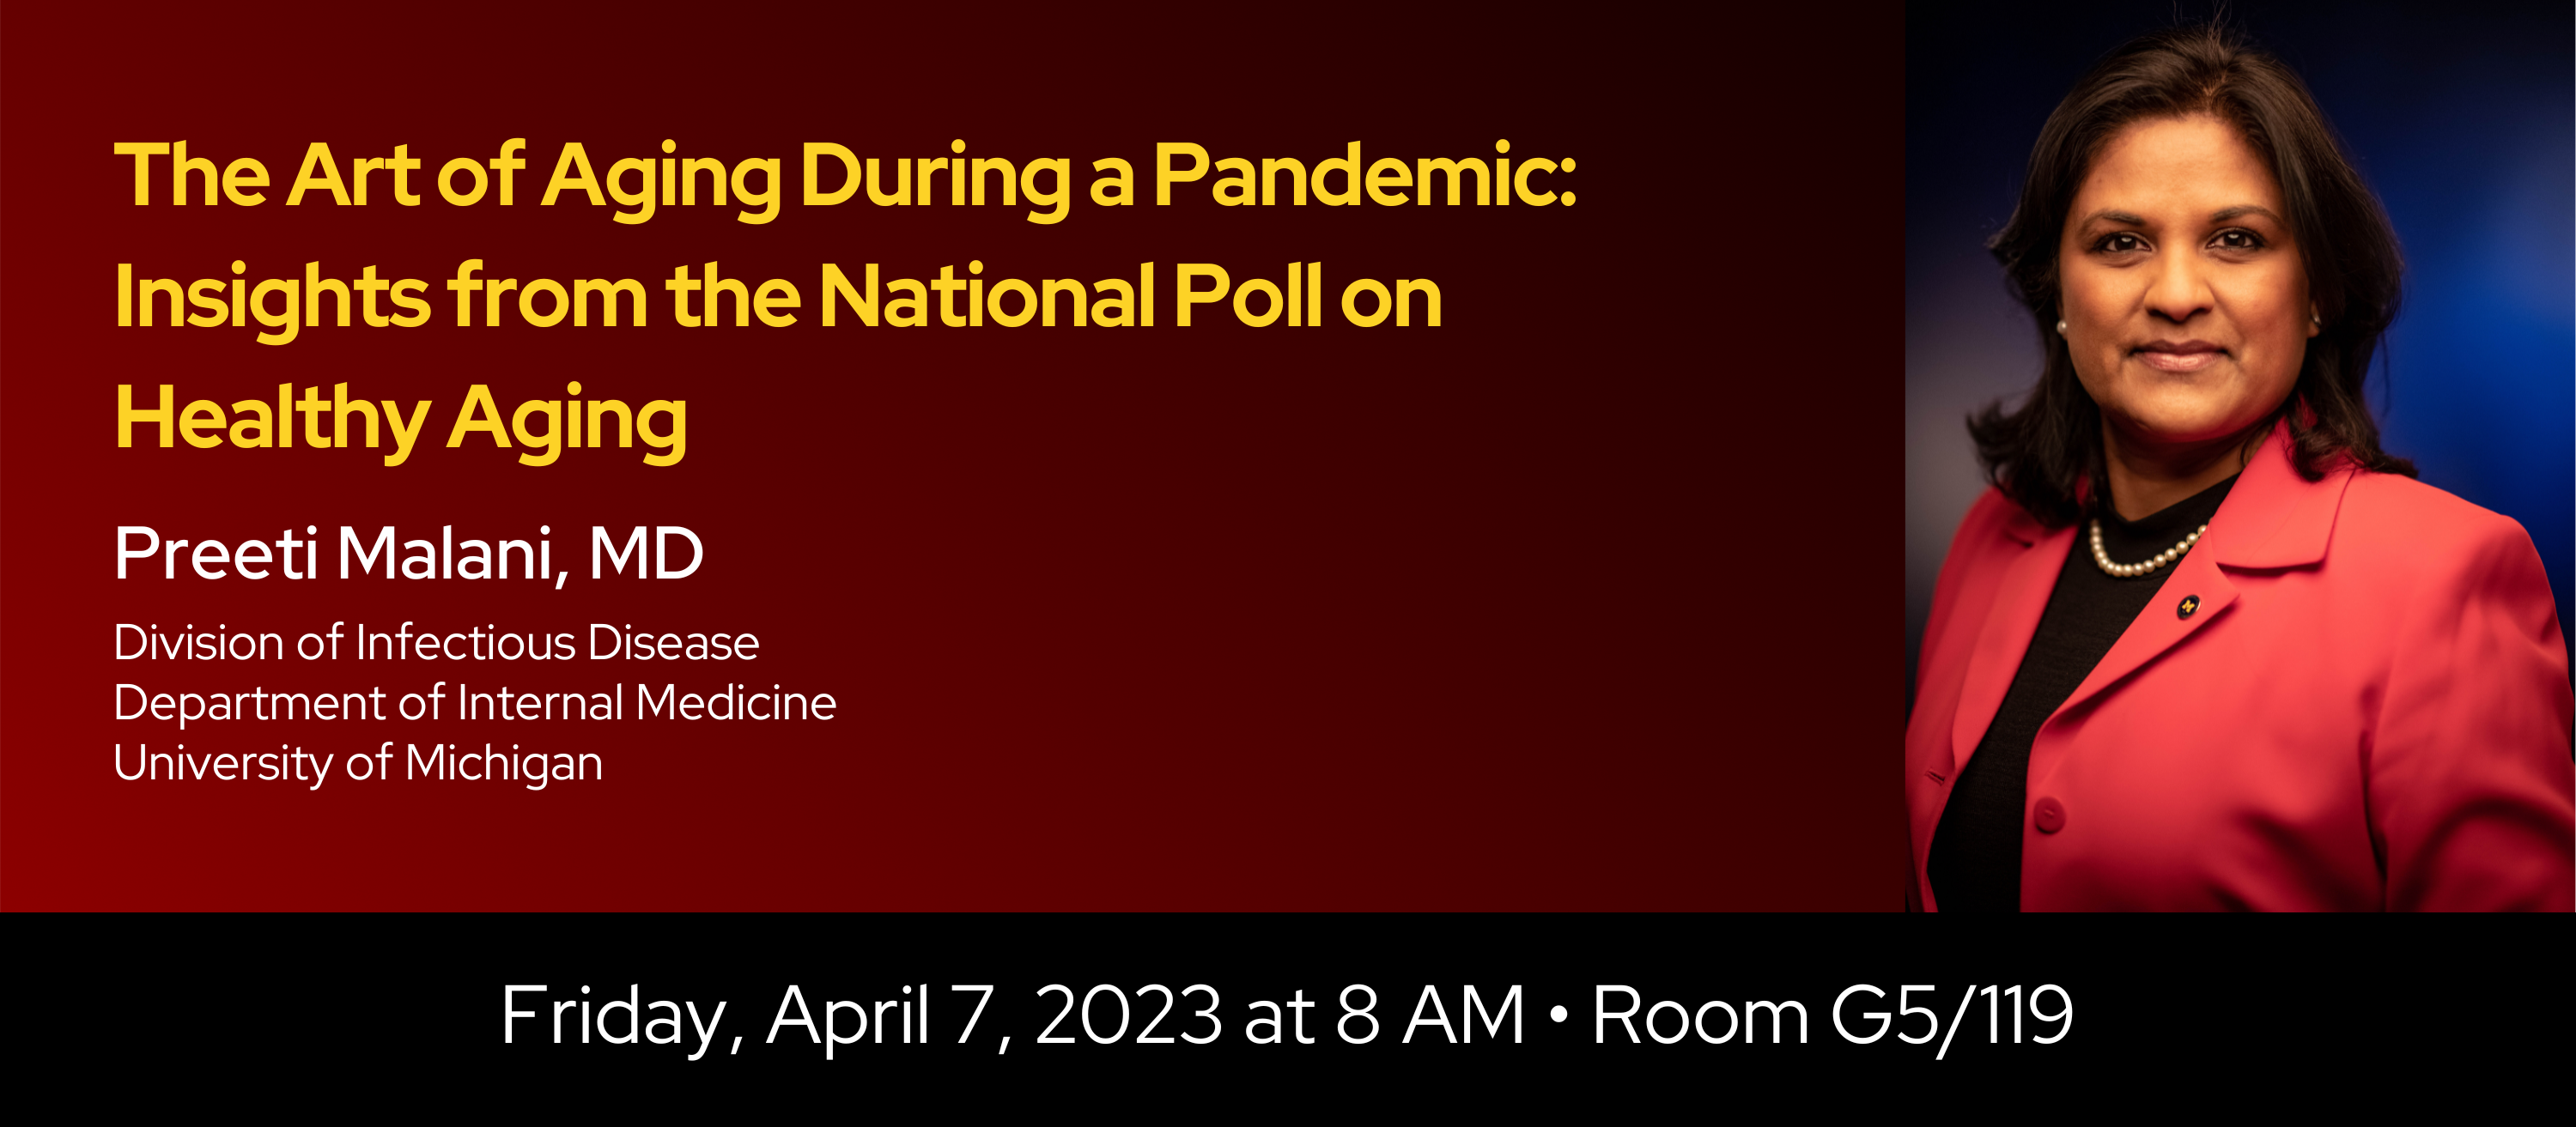 The Art of Aging During a Pandemic: Insights from the National Poll on Healthy Aging